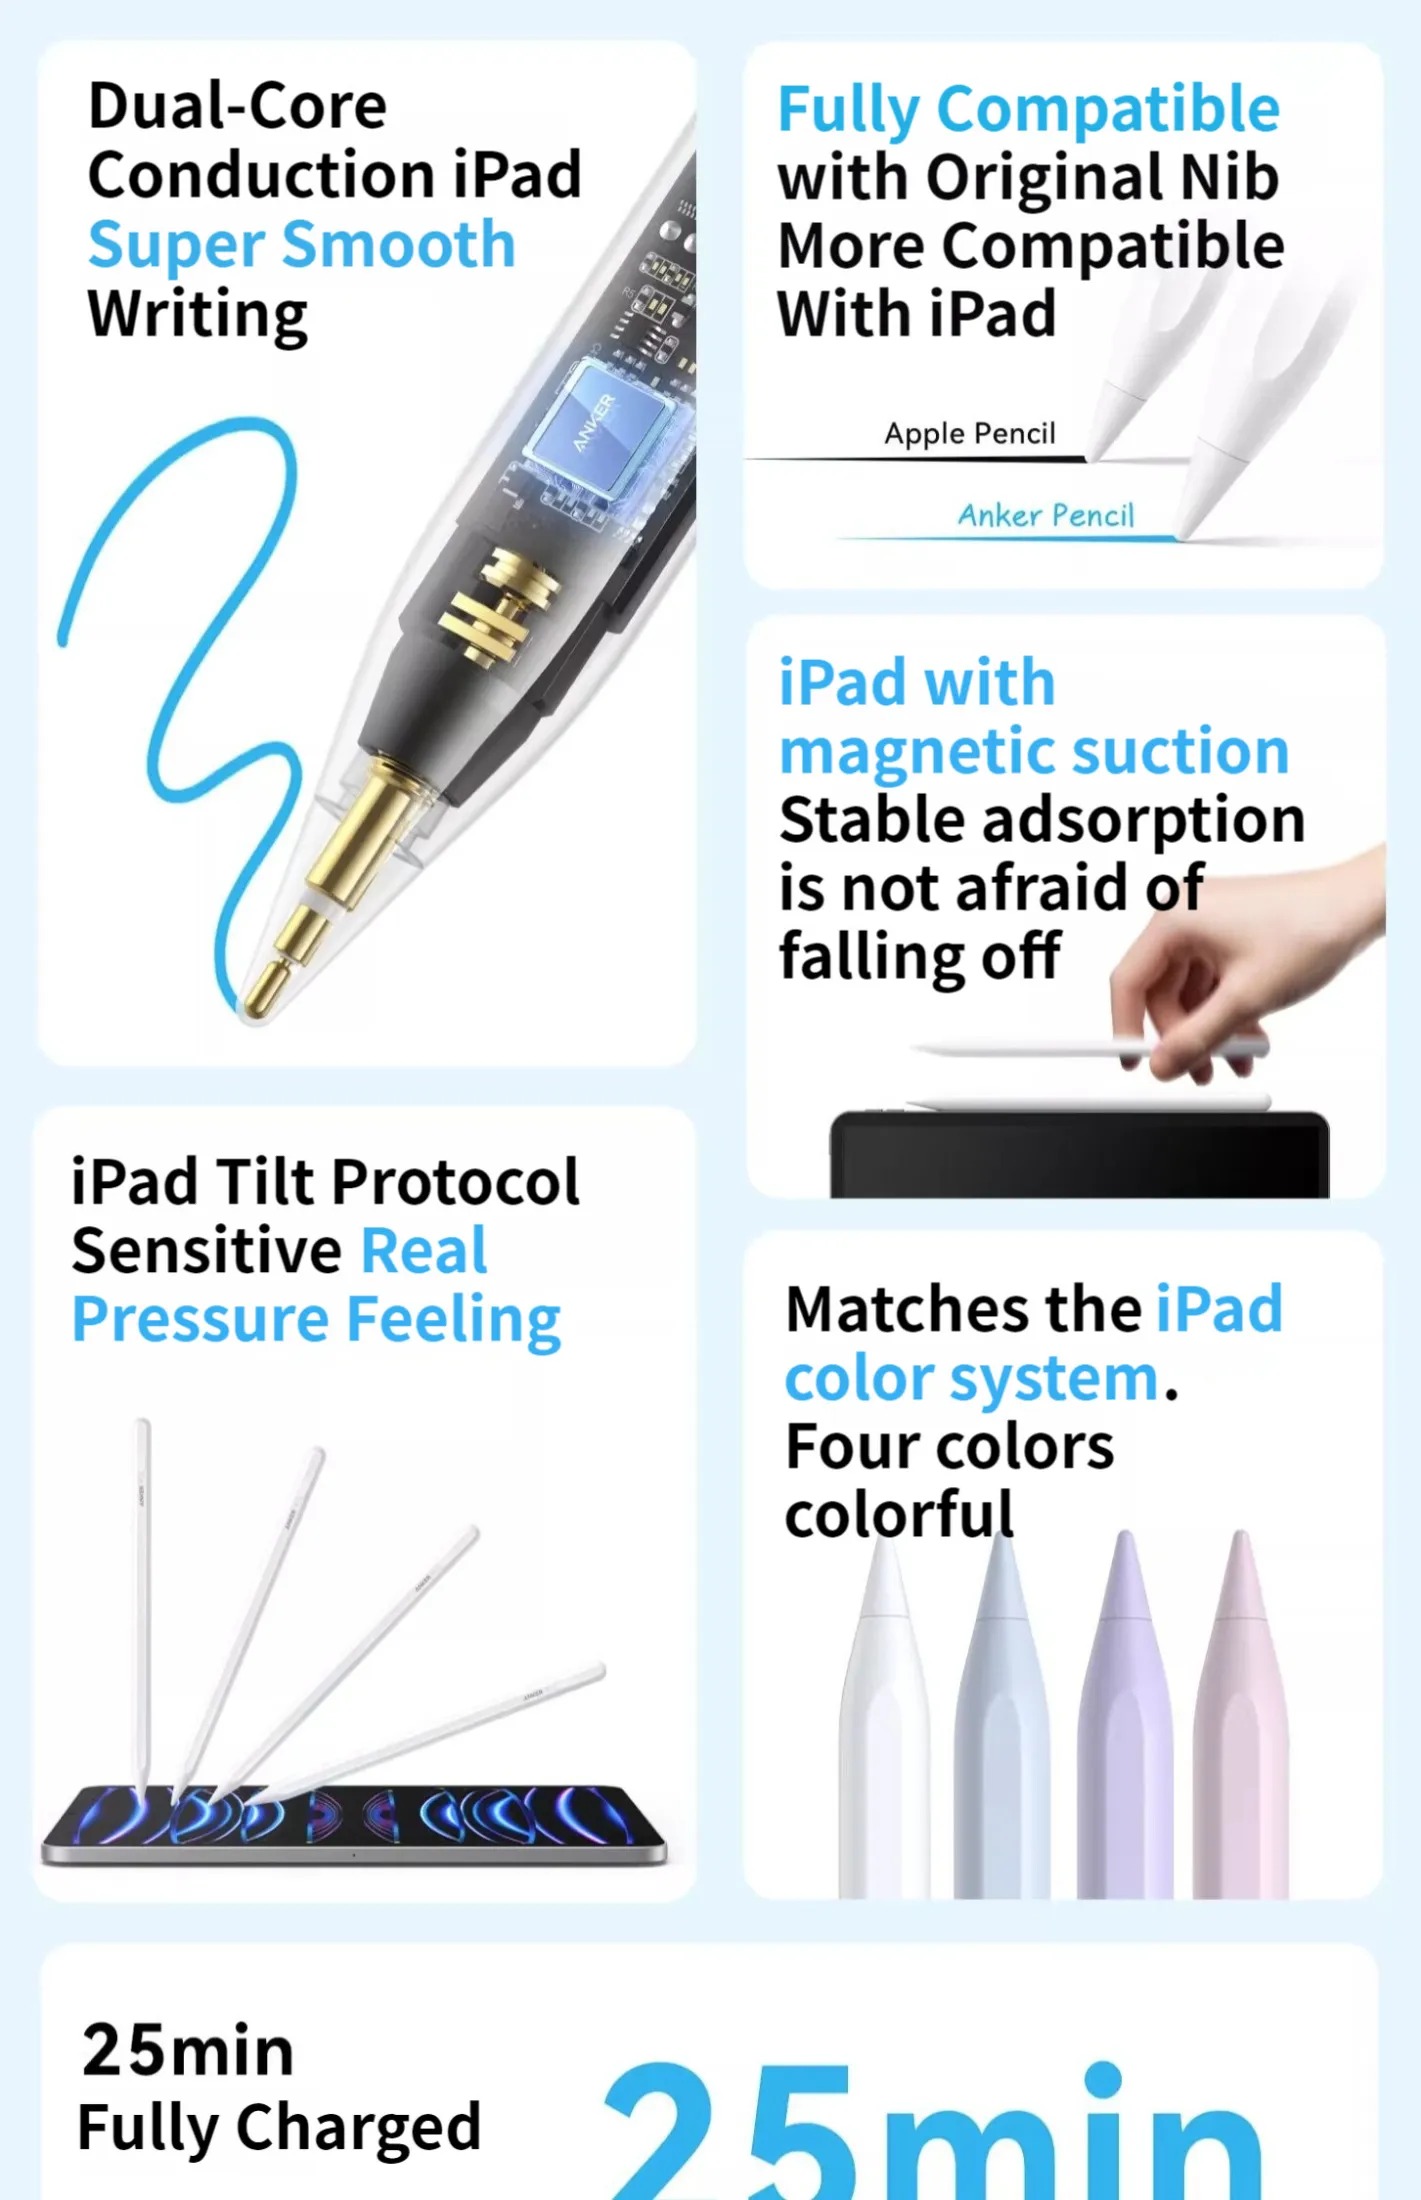 Anker Pencil: Inexpensive Alternative to the Apple Pencil